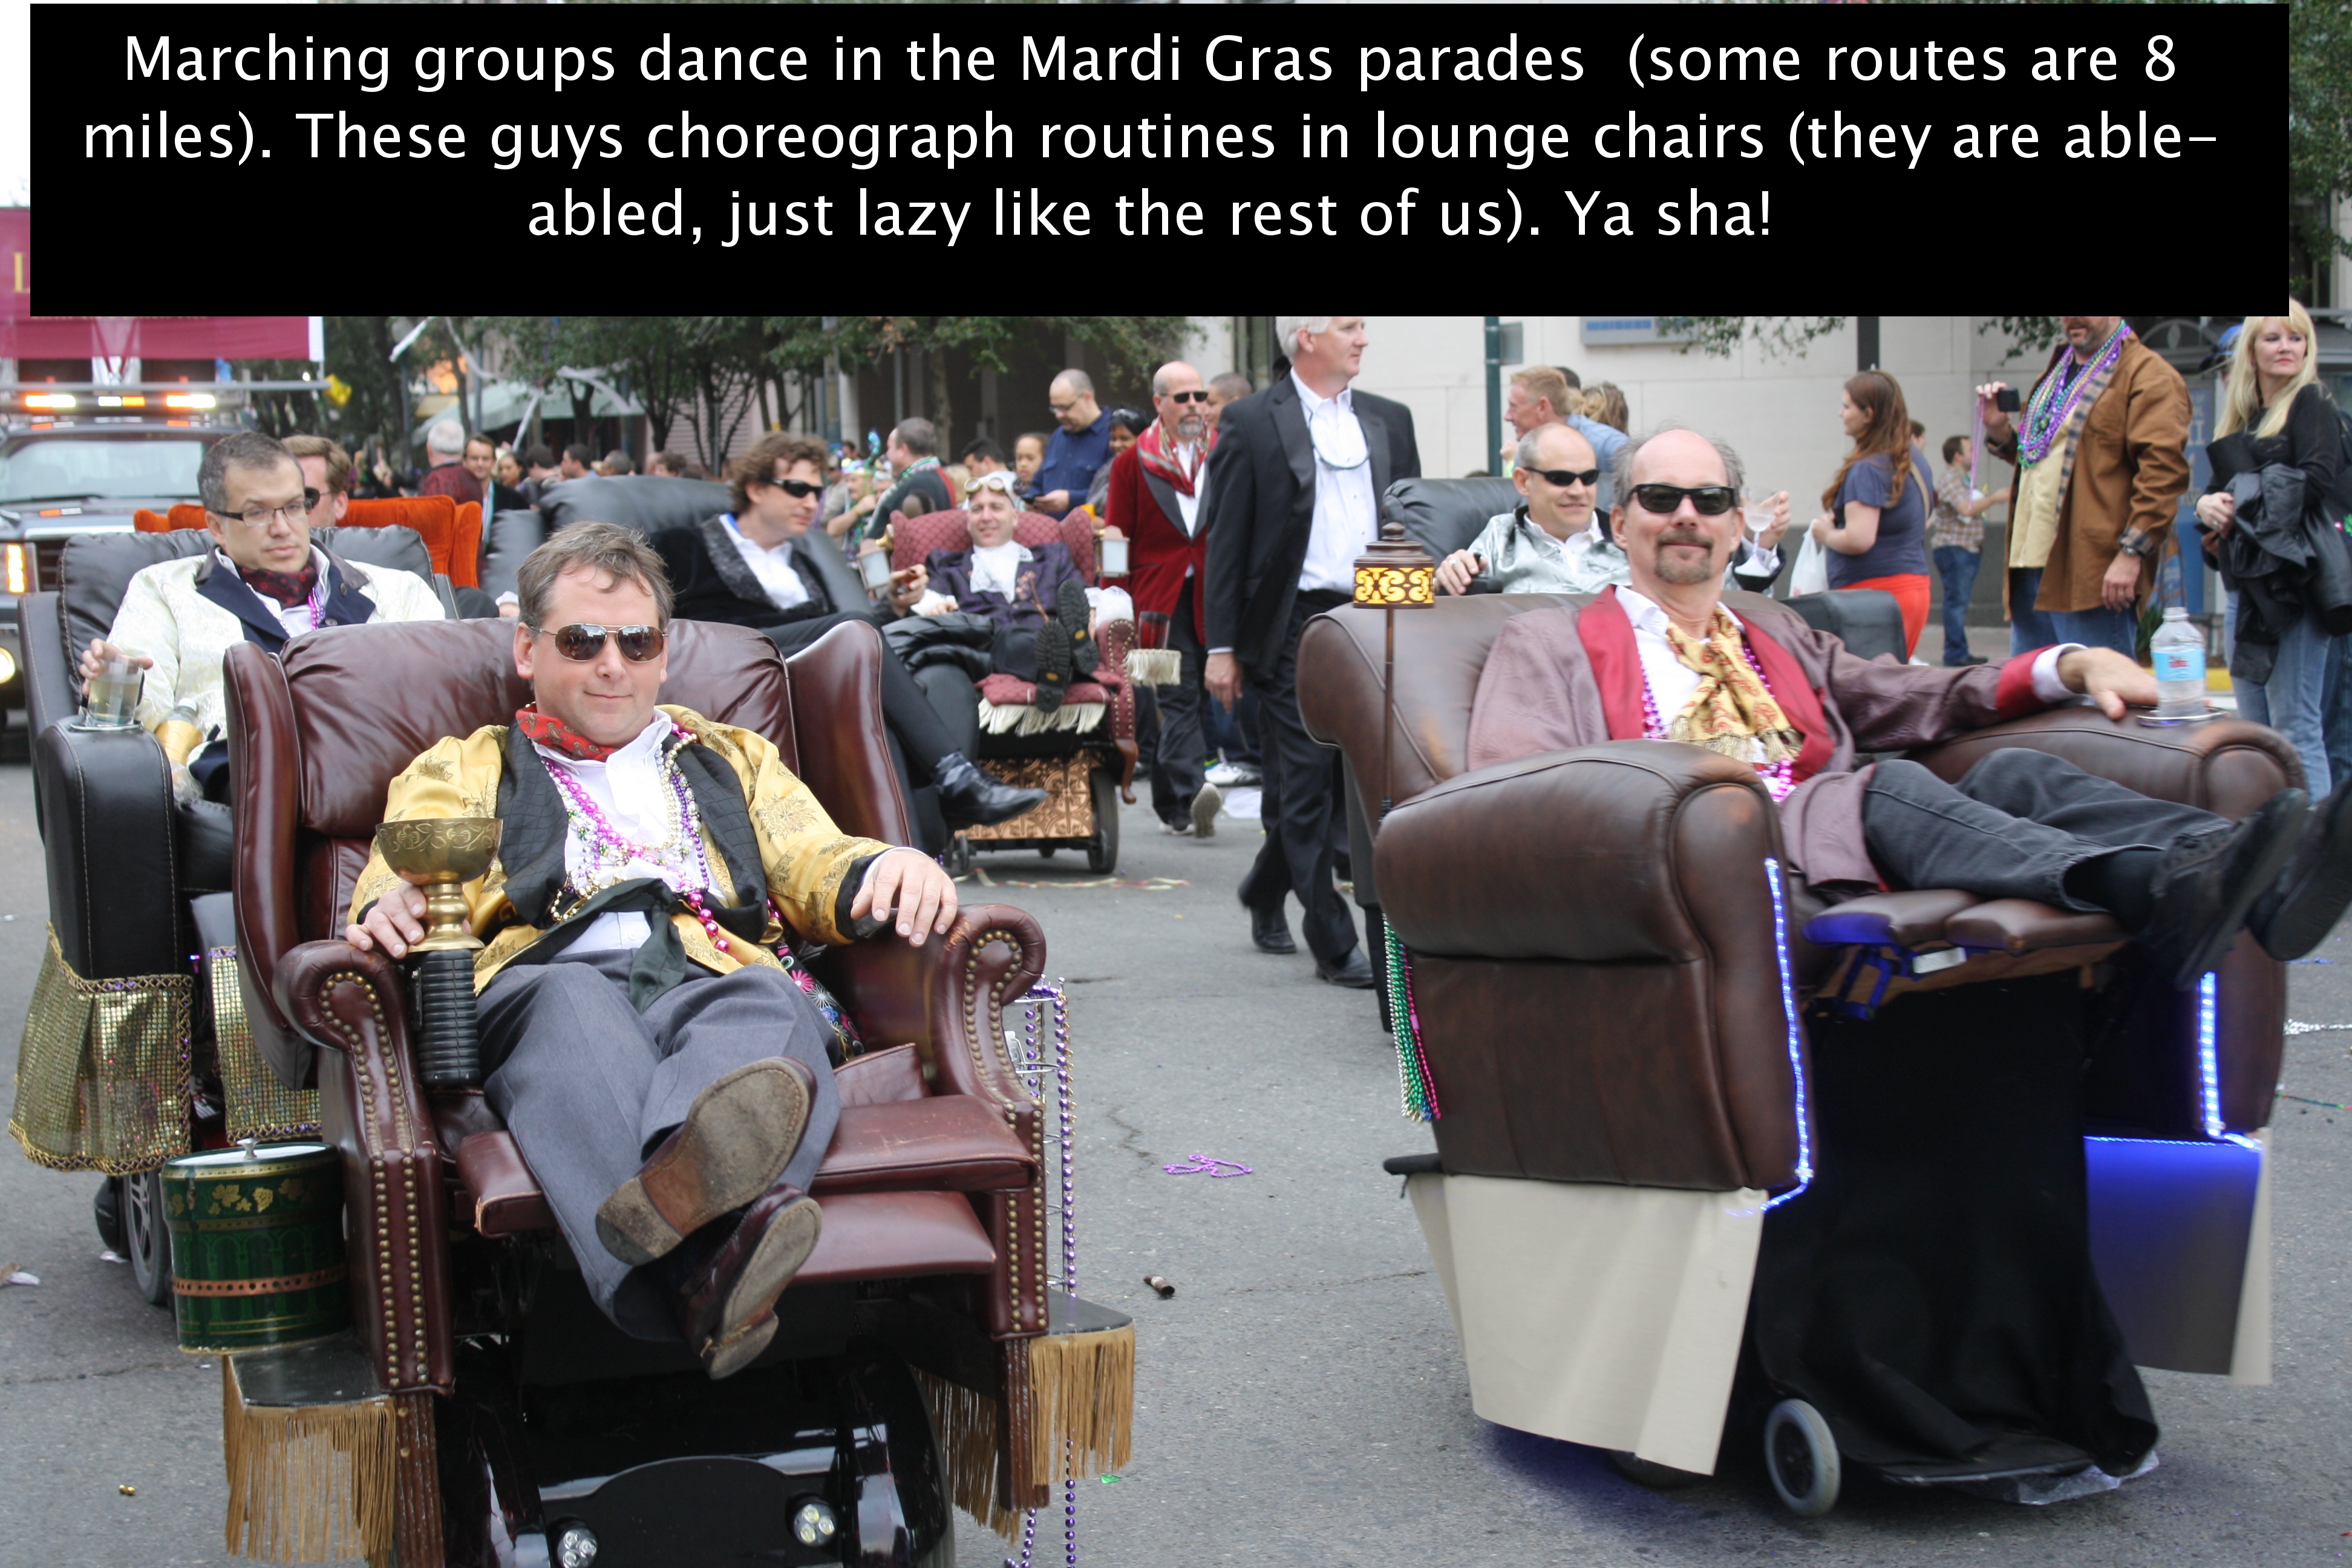 Marching groups dance in the Mardi Gras parades some routes are 8 miles. These guys choreograph routines in lounge chairs they are able abled, just lazy the rest of us. Ya sha!